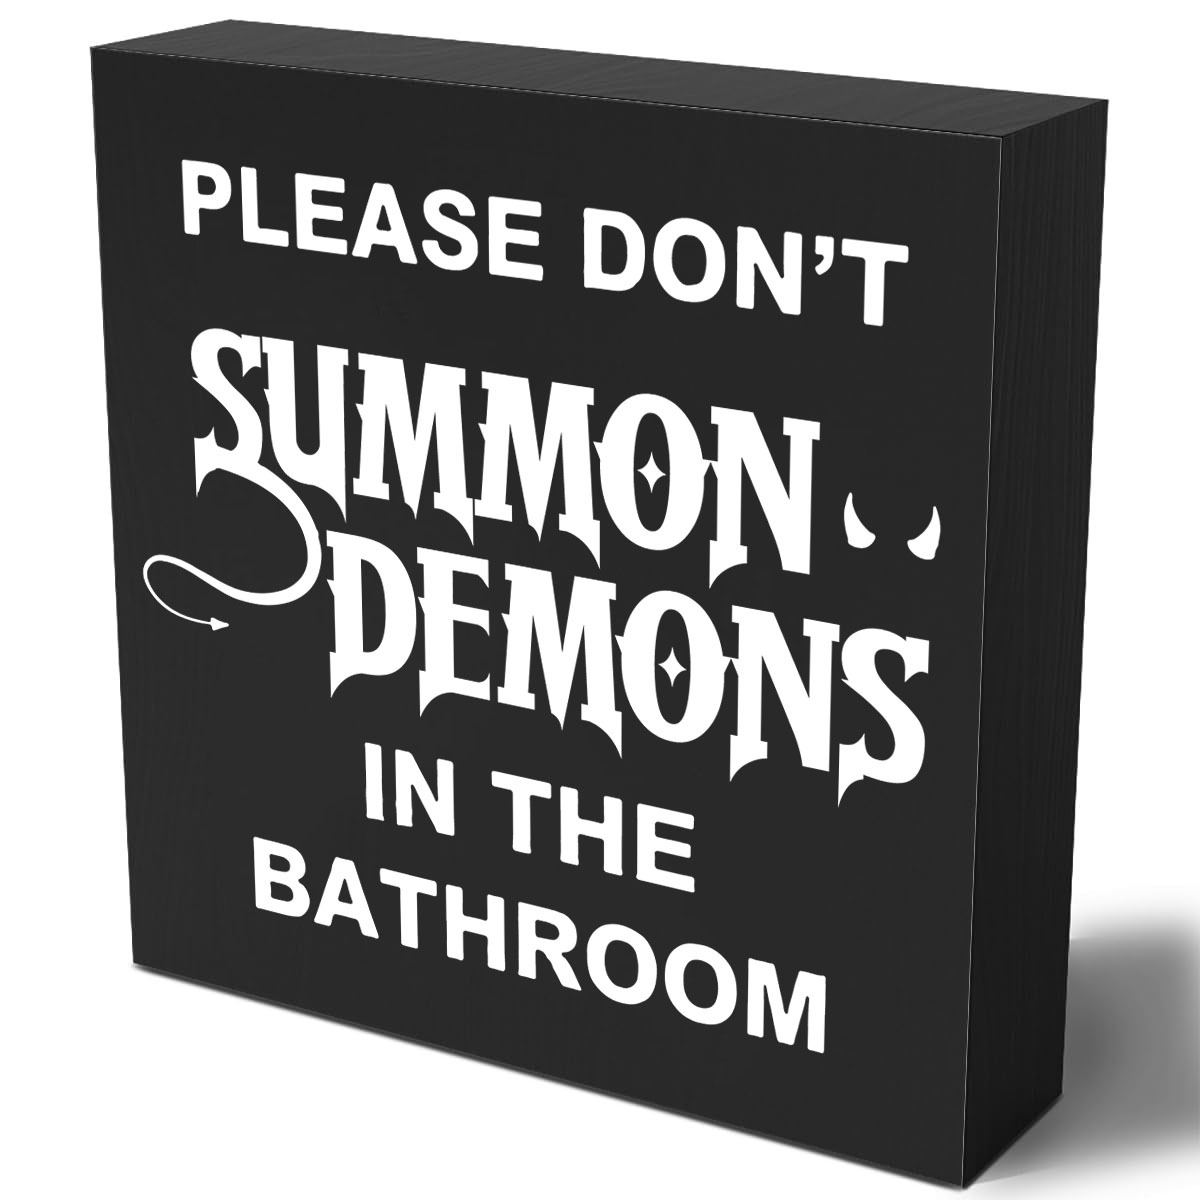 

1pc Funny Please Don't Summon Demons In The Bathroom Wood Box Sign, Decor Bathroom Wooden Box Signs With Sayings Desk Decoration Home Shelf Decor Sign 5 X 5 Inches